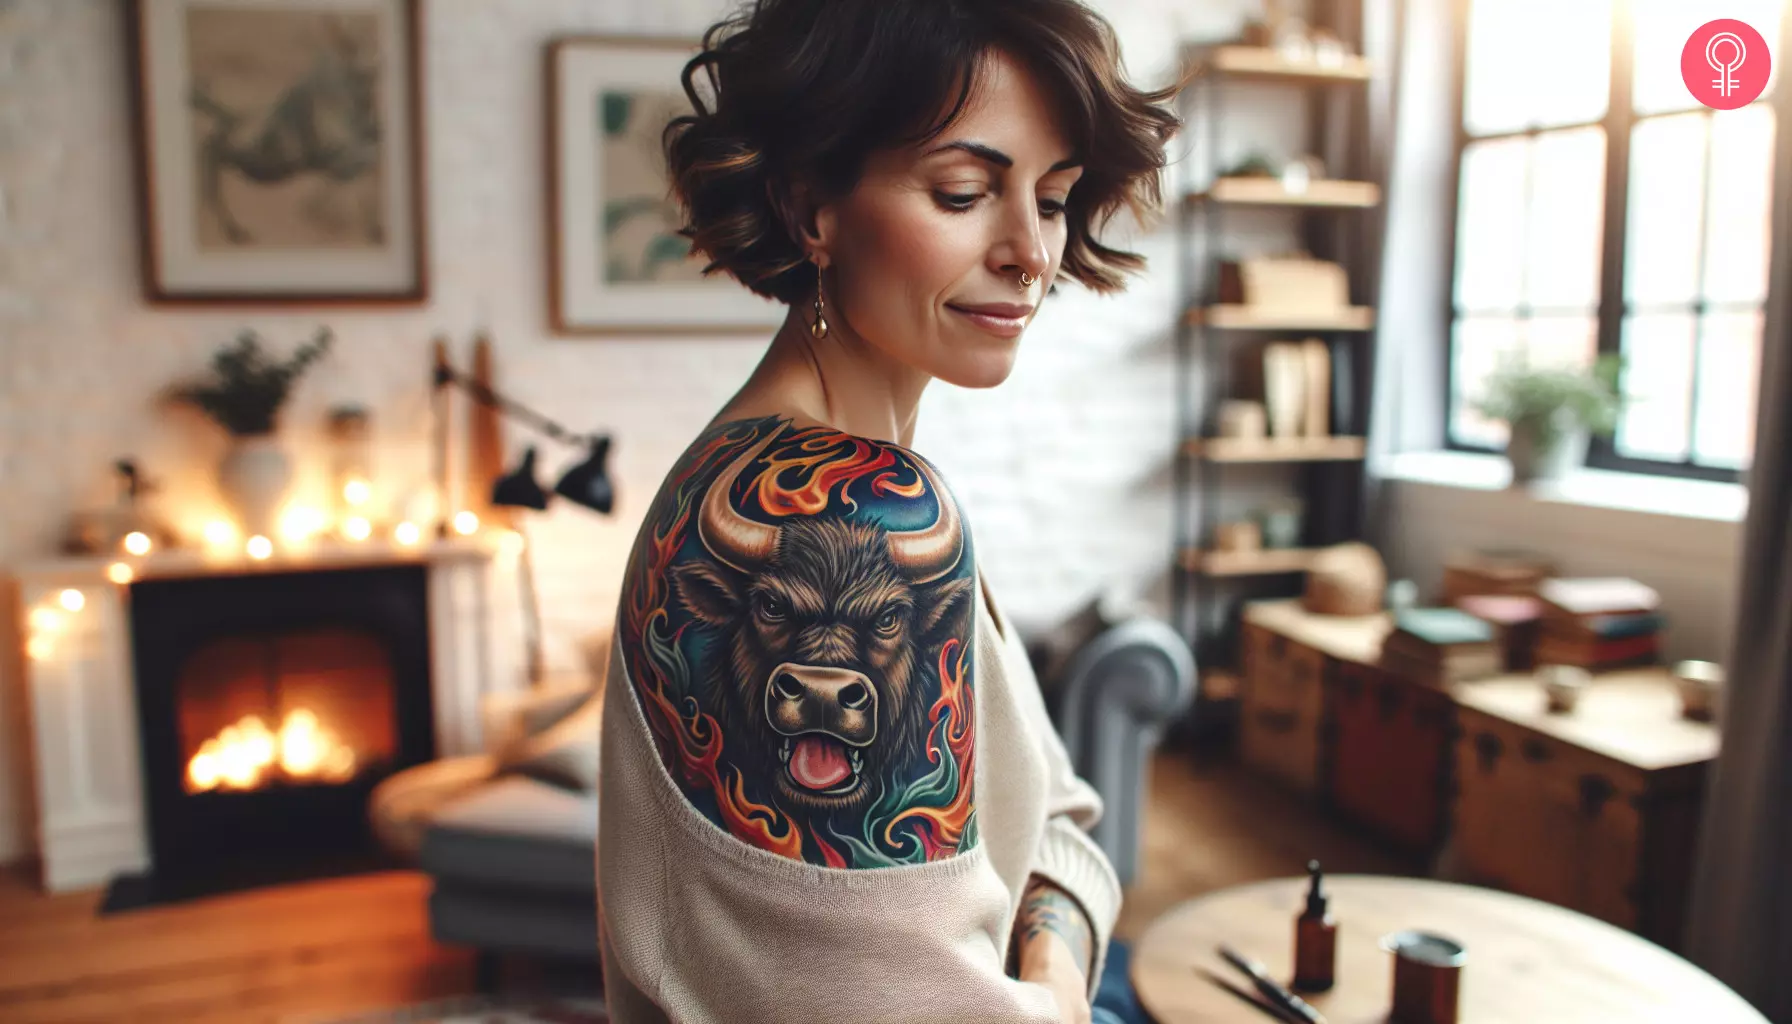 An angry bull tattoo on a woman’s shoulder